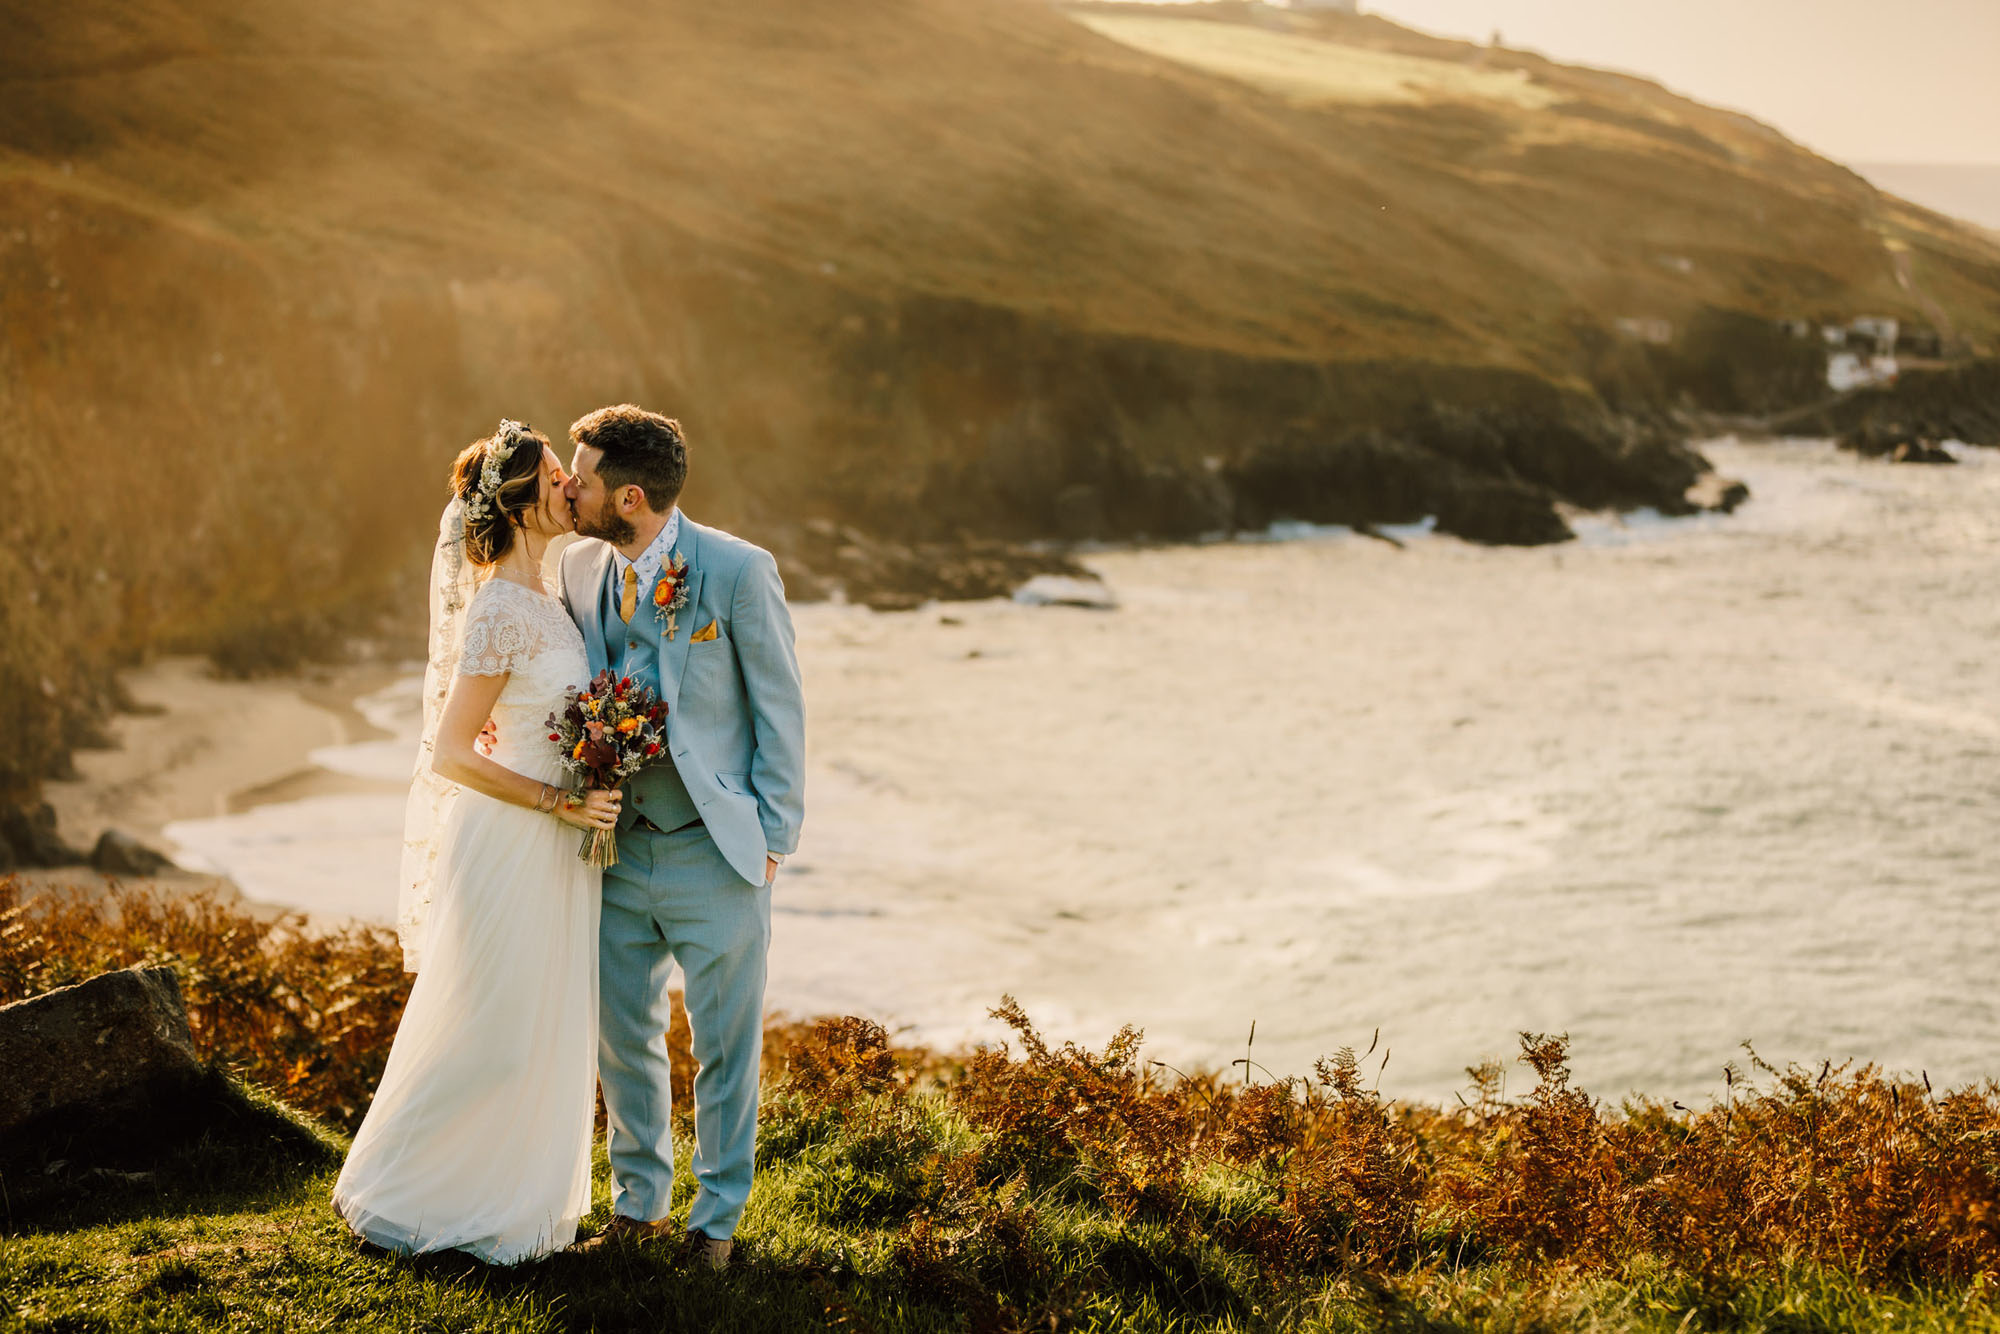 Beautiful golden wedding photo on a Cornwall clifftop. By Chris Armstrong Photography in Cornwall